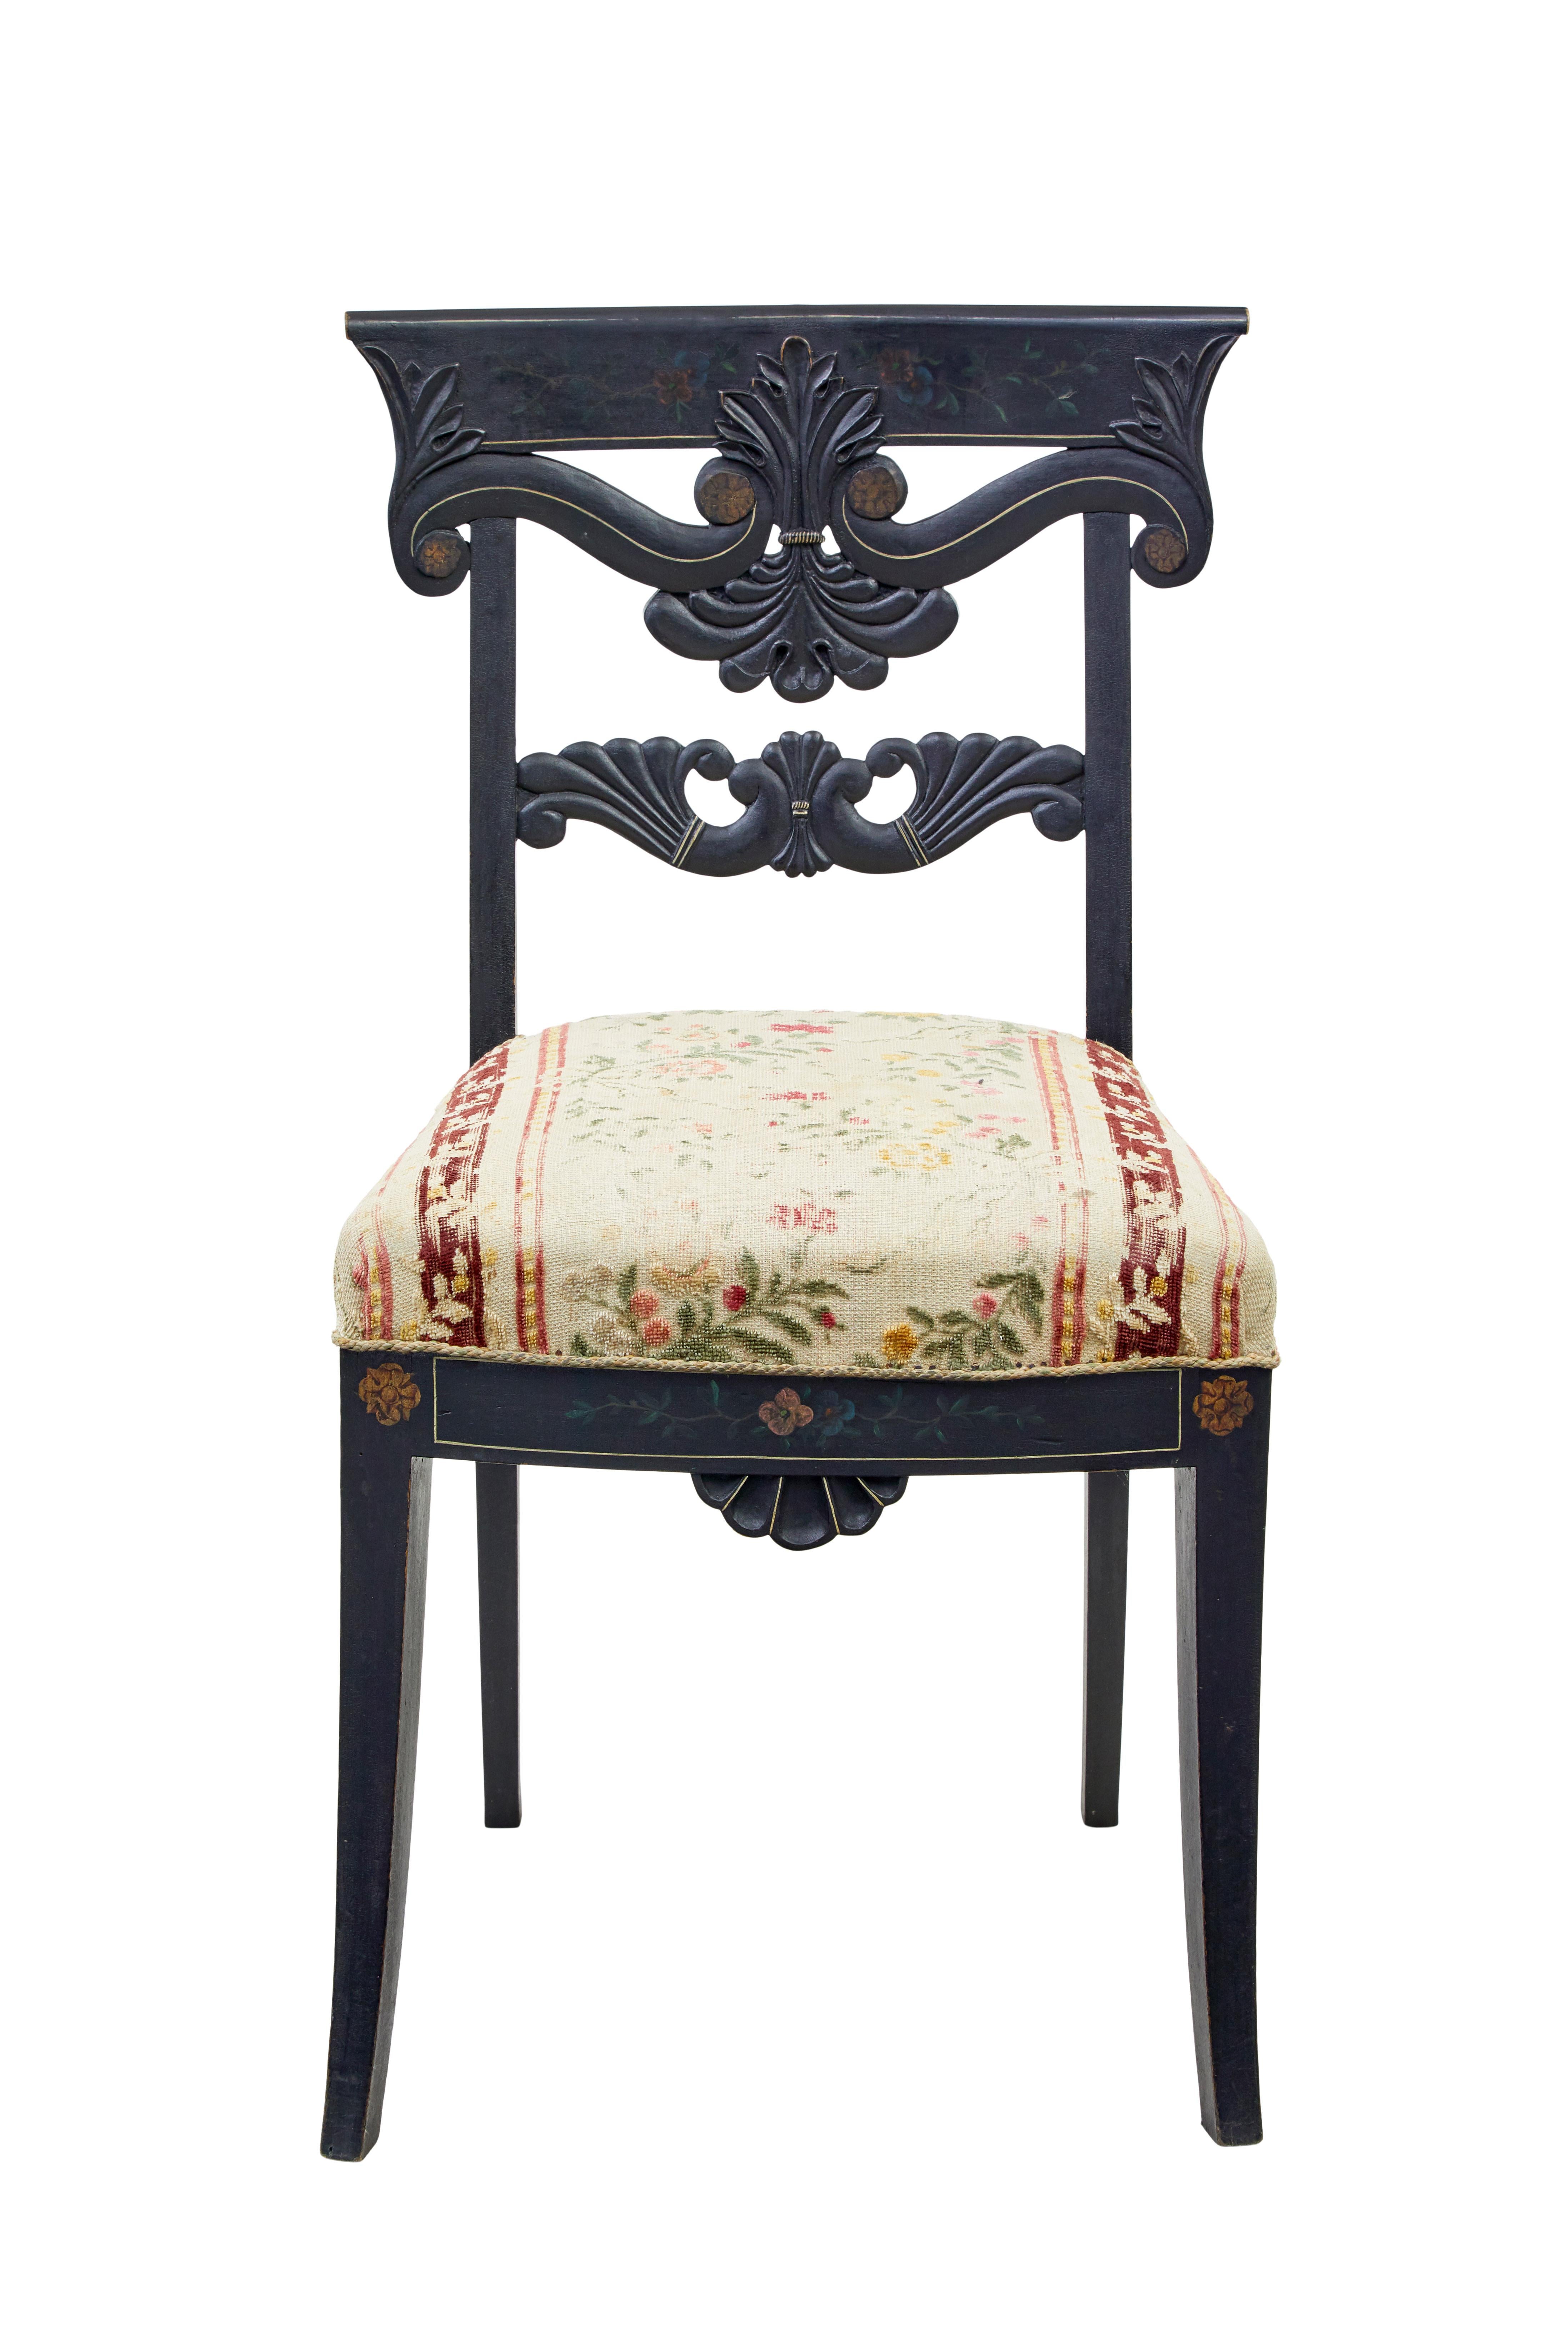 Set of 6 Scandinavian carved and hand painted dining chairs circa 1890.

Fine set of chairs made from solid beech, painted black with hand painted elements to the back rest and front rail.  Carved scrolling back rest and shell detail to front